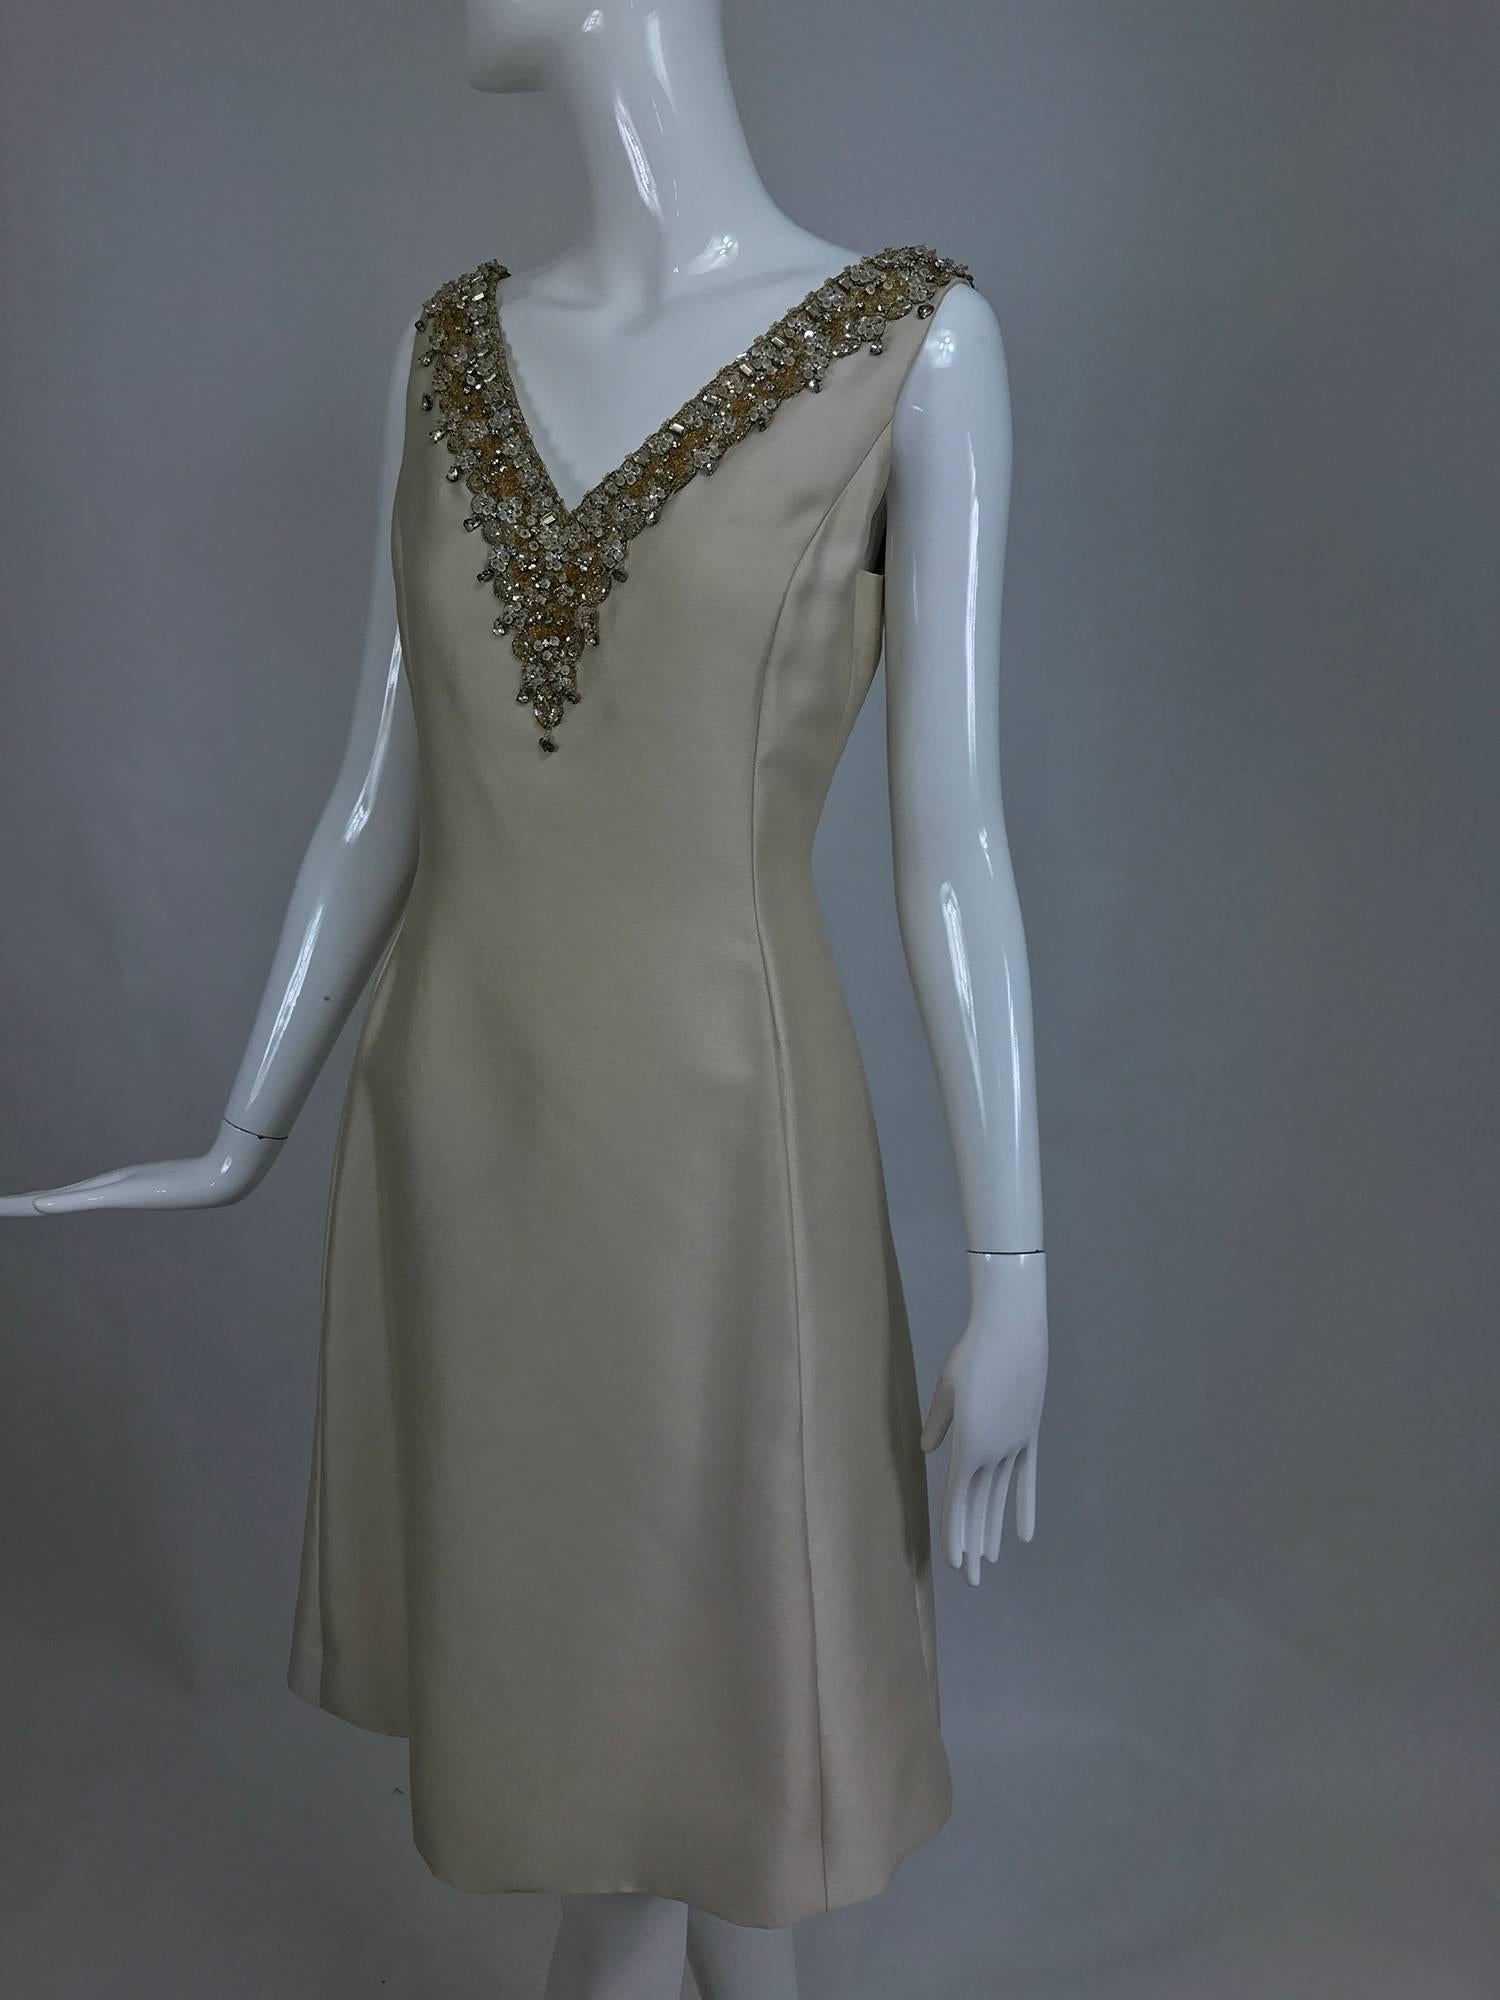 Vintage Malcolm Starr jeweled V neck lustrous cream silk dress from the early 1960s...Princess seam dress has a deep V neckline that is heavily beaded and has crystal set rhinestone trims...Beautiful lustrous mid weight silk dress has front on seam